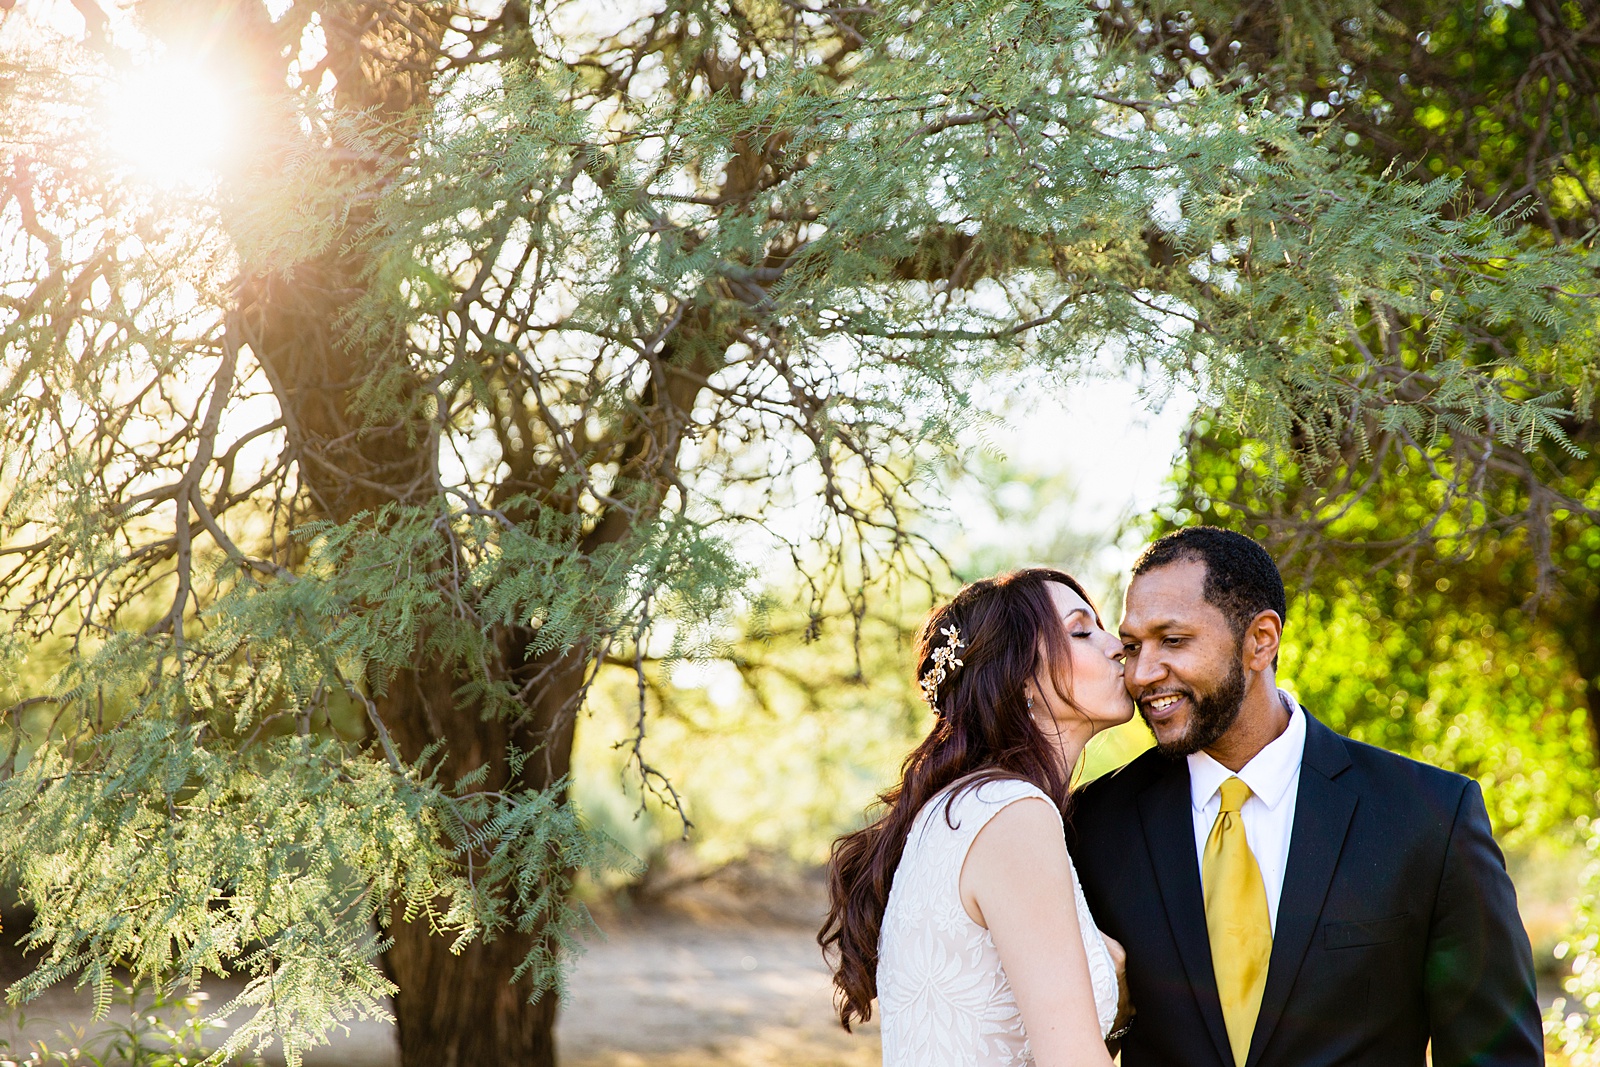 Bride and groom share a kiss during their Backyard Micro wedding by Scottsdale wedding photographer PMA Photography.